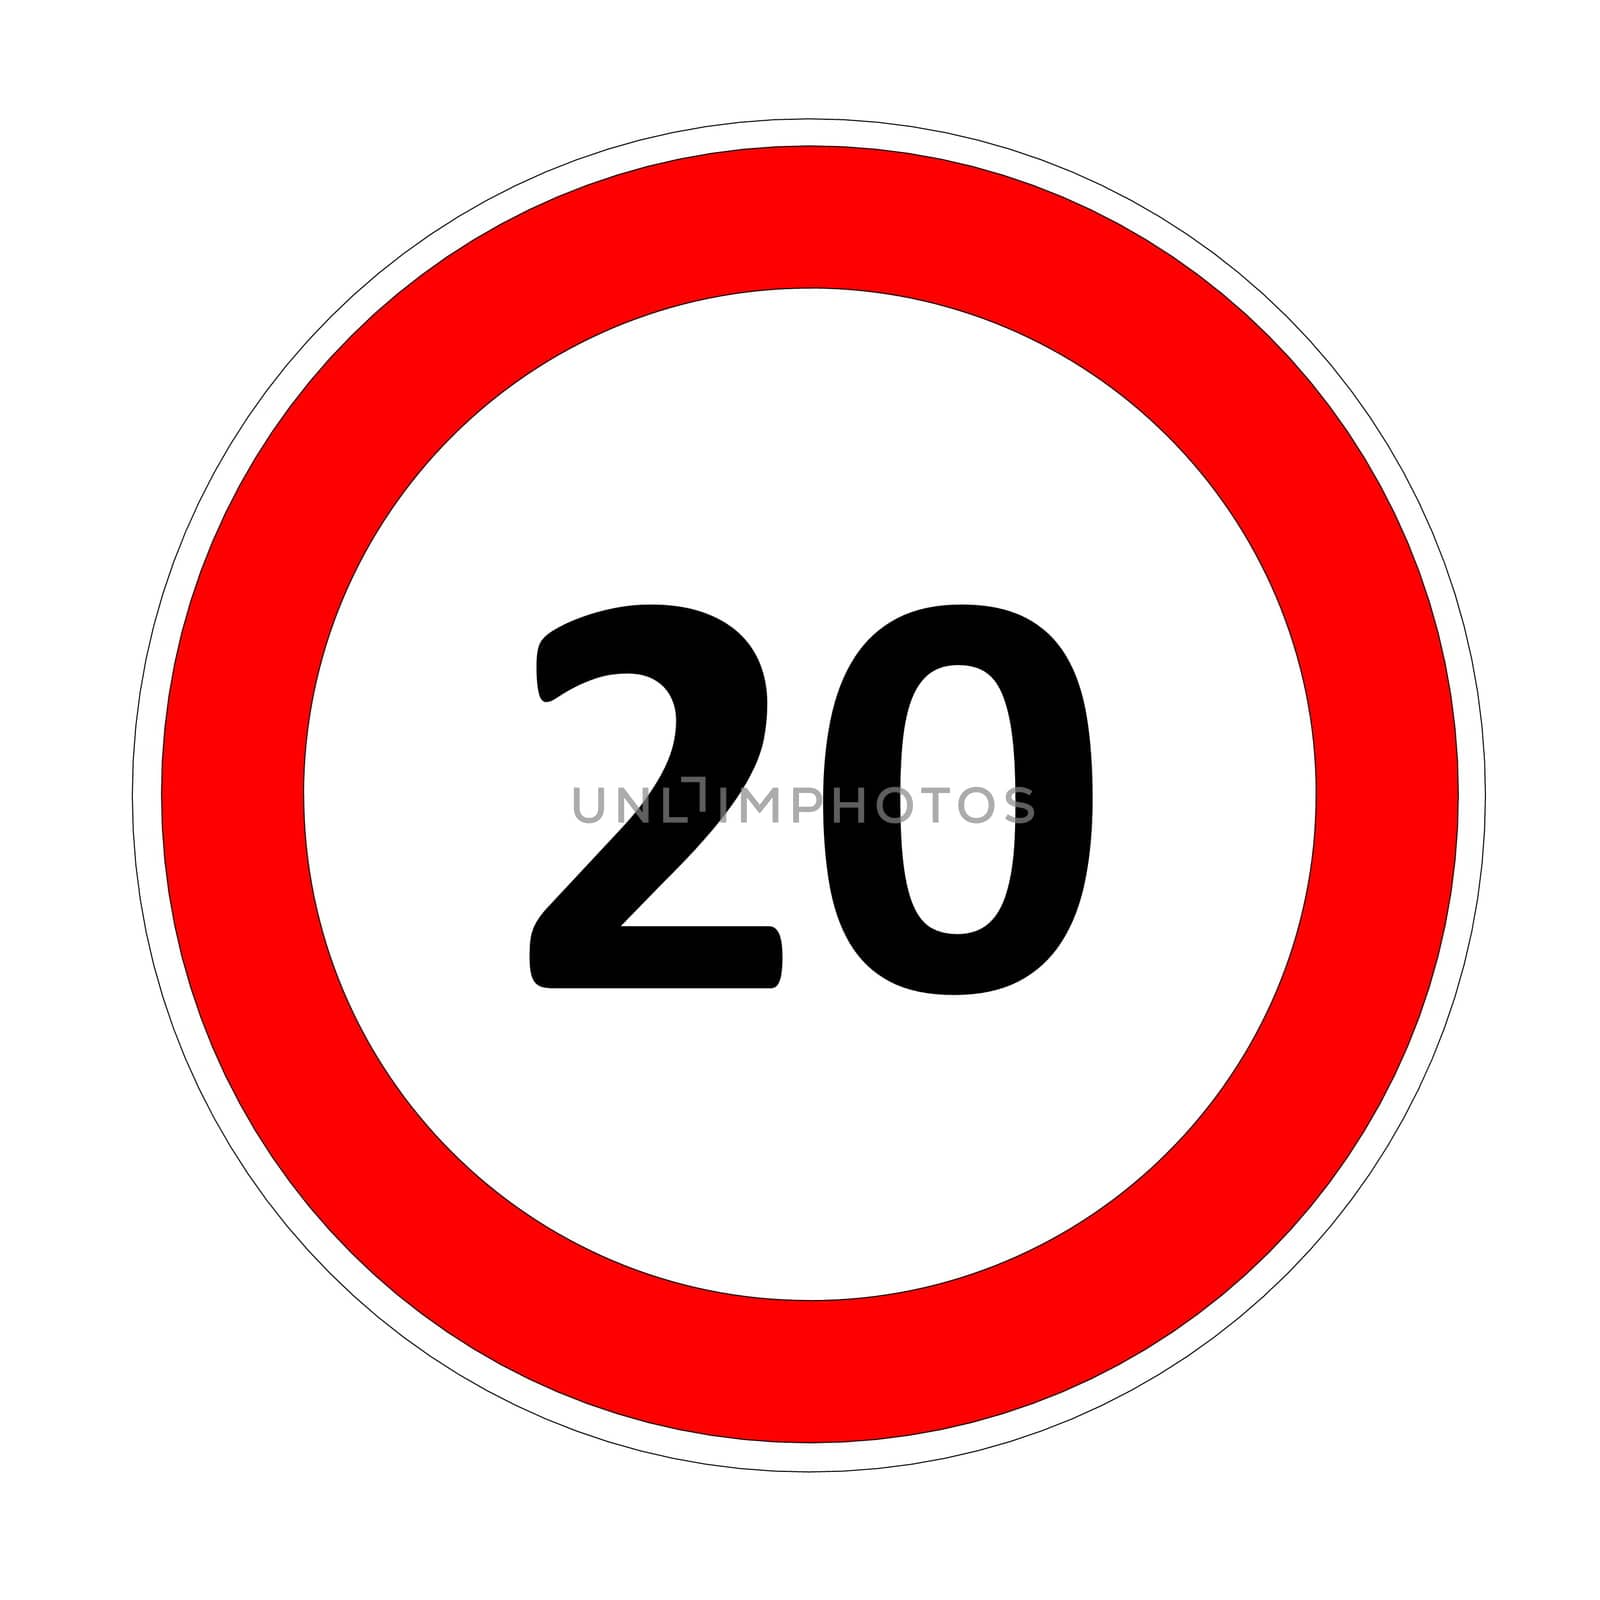 20 speed limit sign by Elenaphotos21